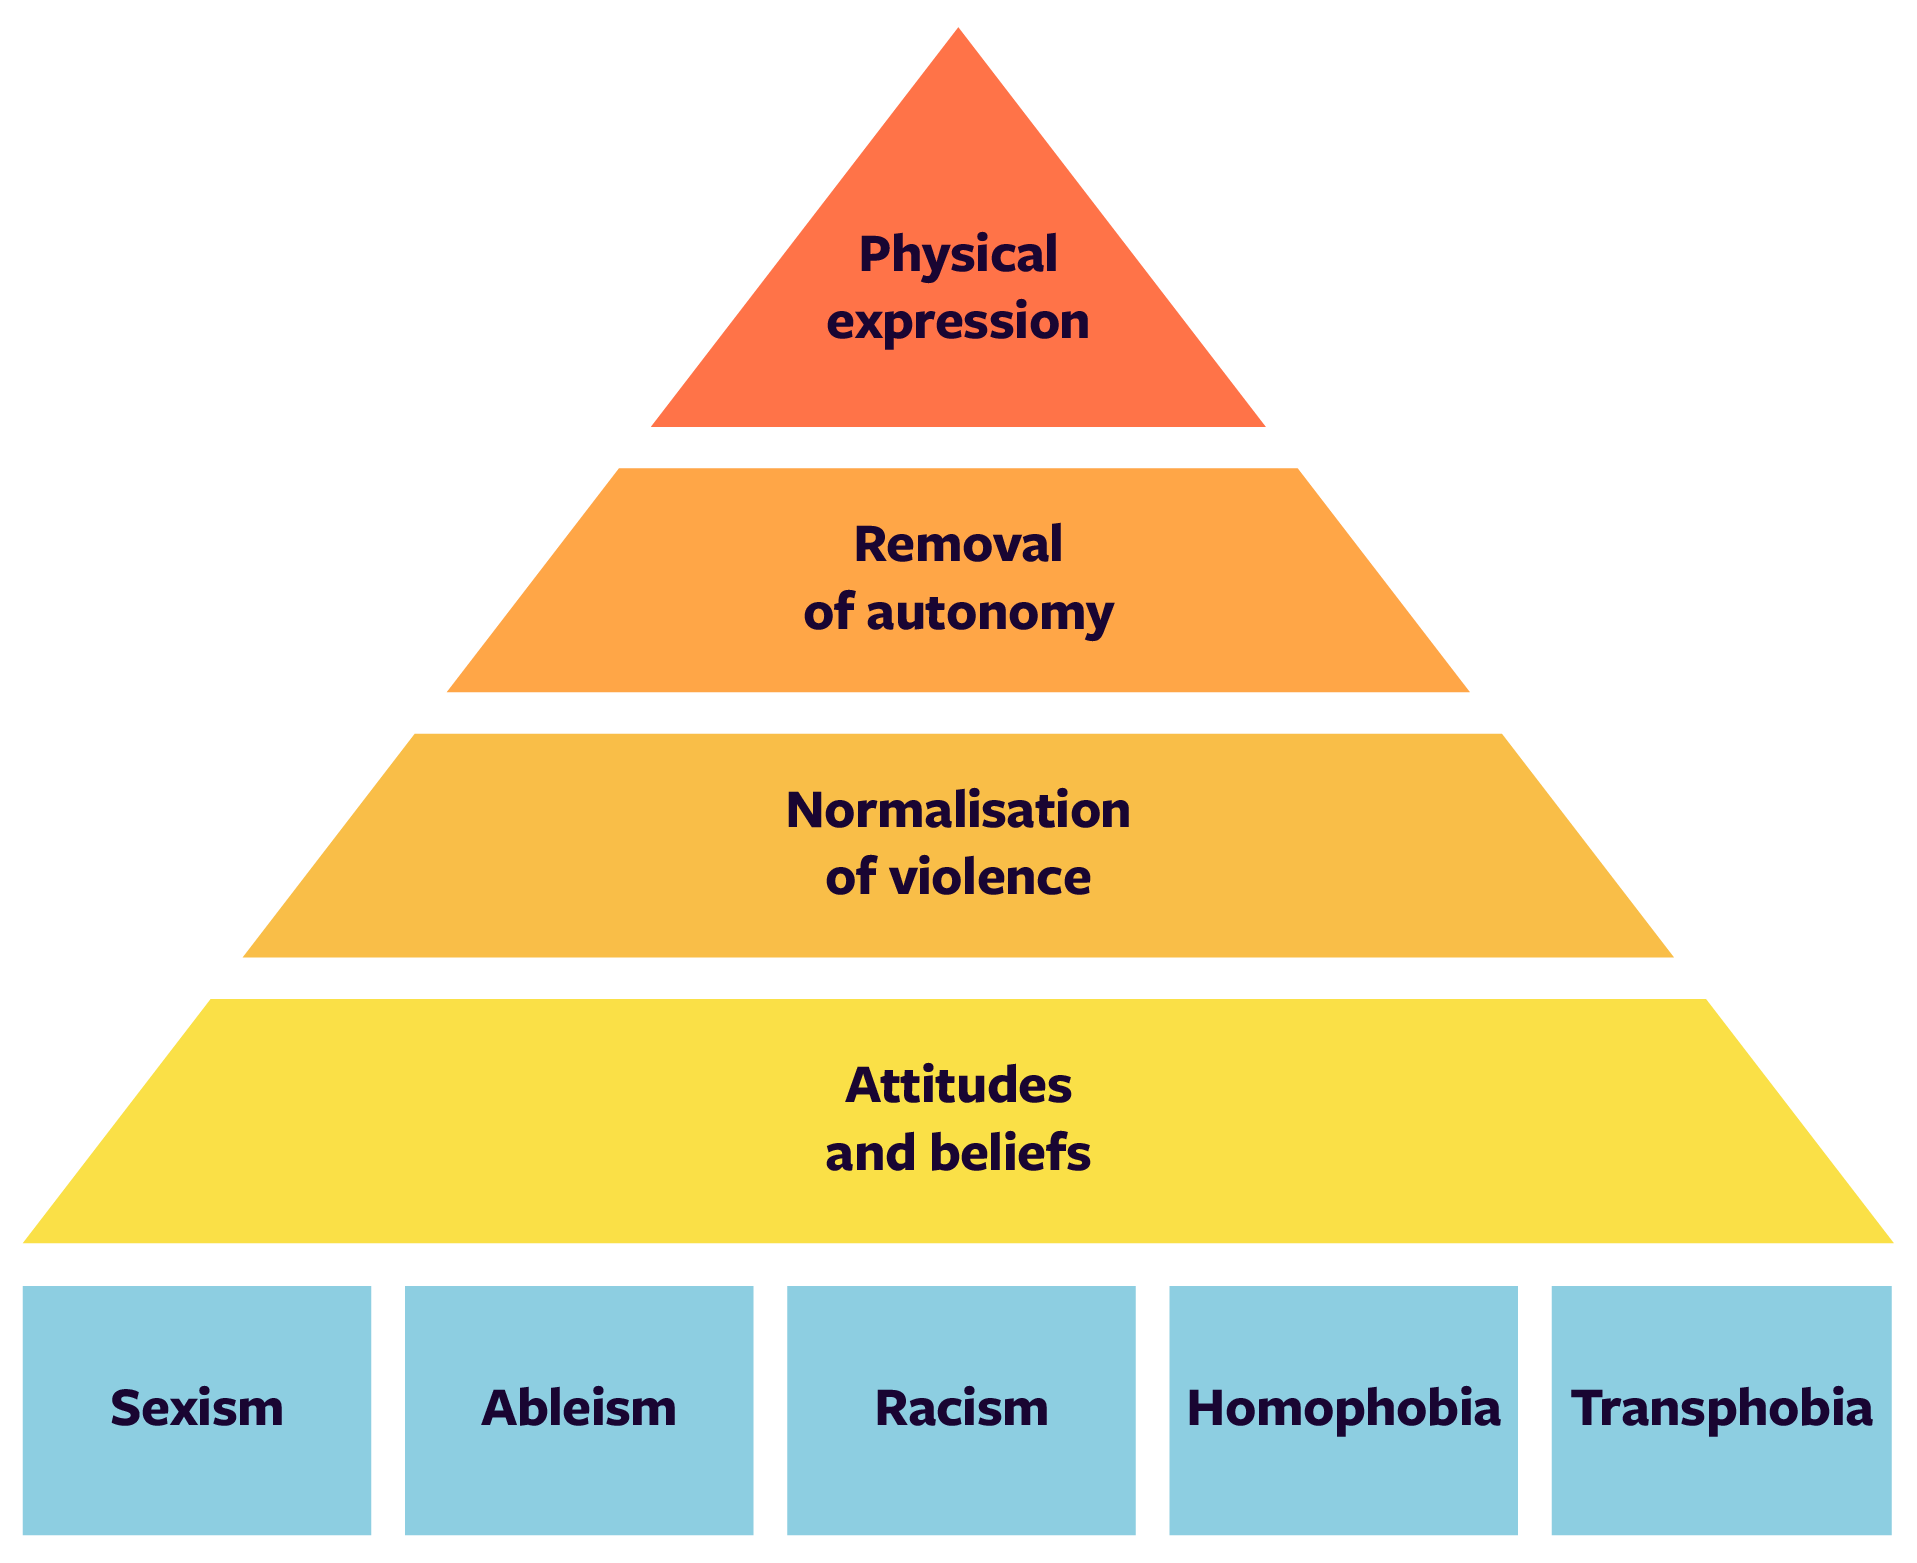 The sexual violence pyramid shows how the different levels of sexual violence connect. Content is explained in following text.